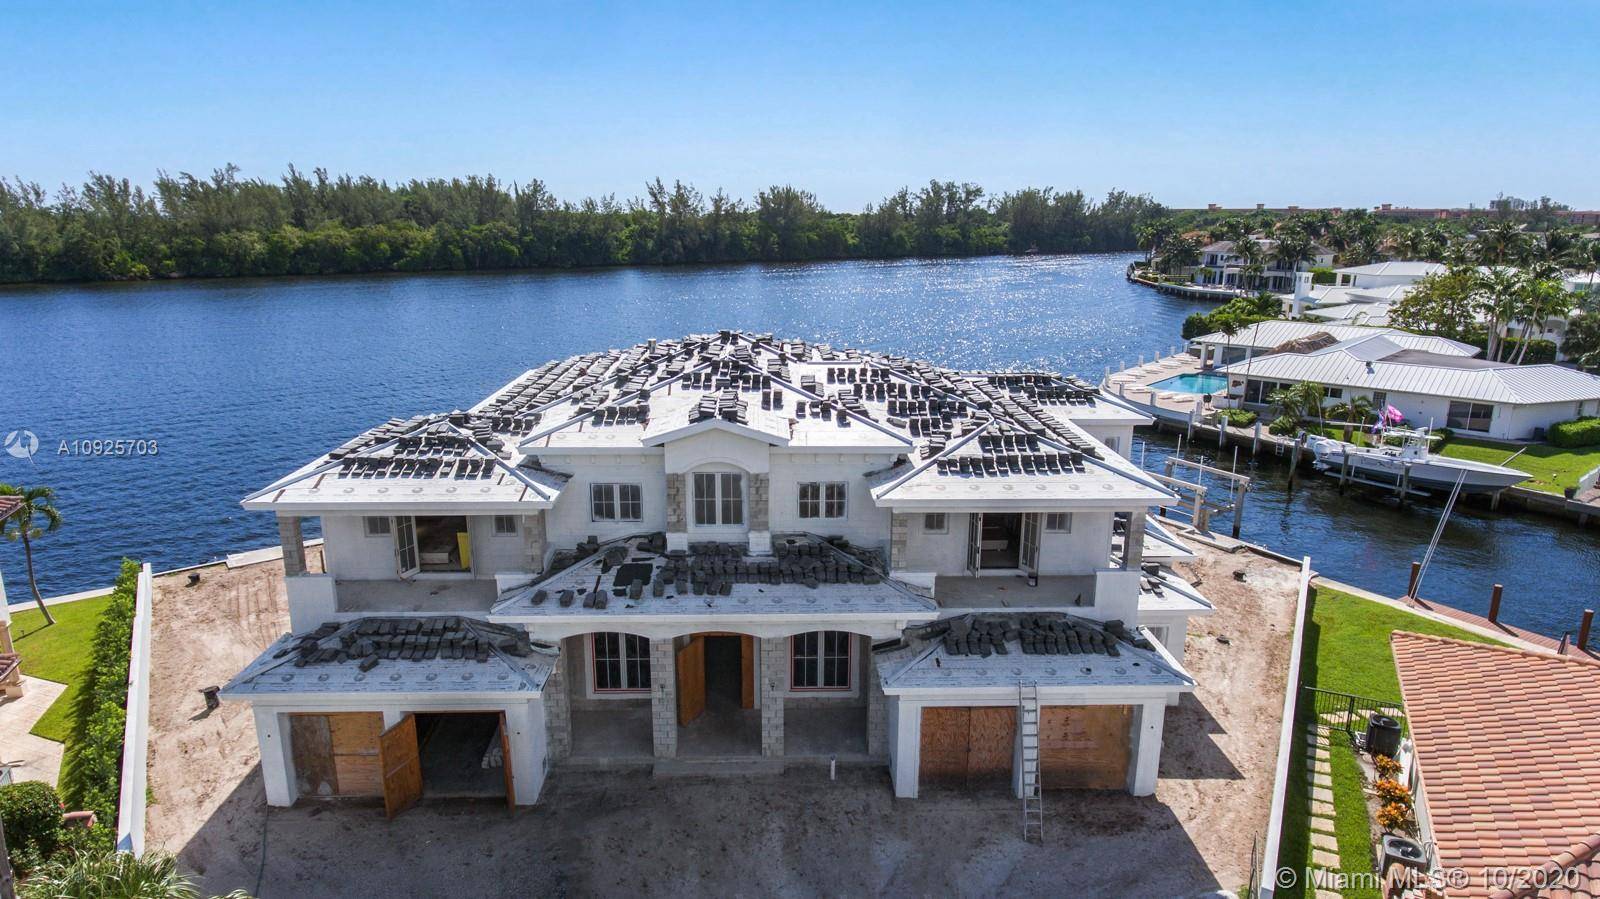 COMPLETION SPRING 2021 This brand new, exquisite British West Indies estate designed built by First Water Building Design, is located at the end of a cul de sac in exclusive ...